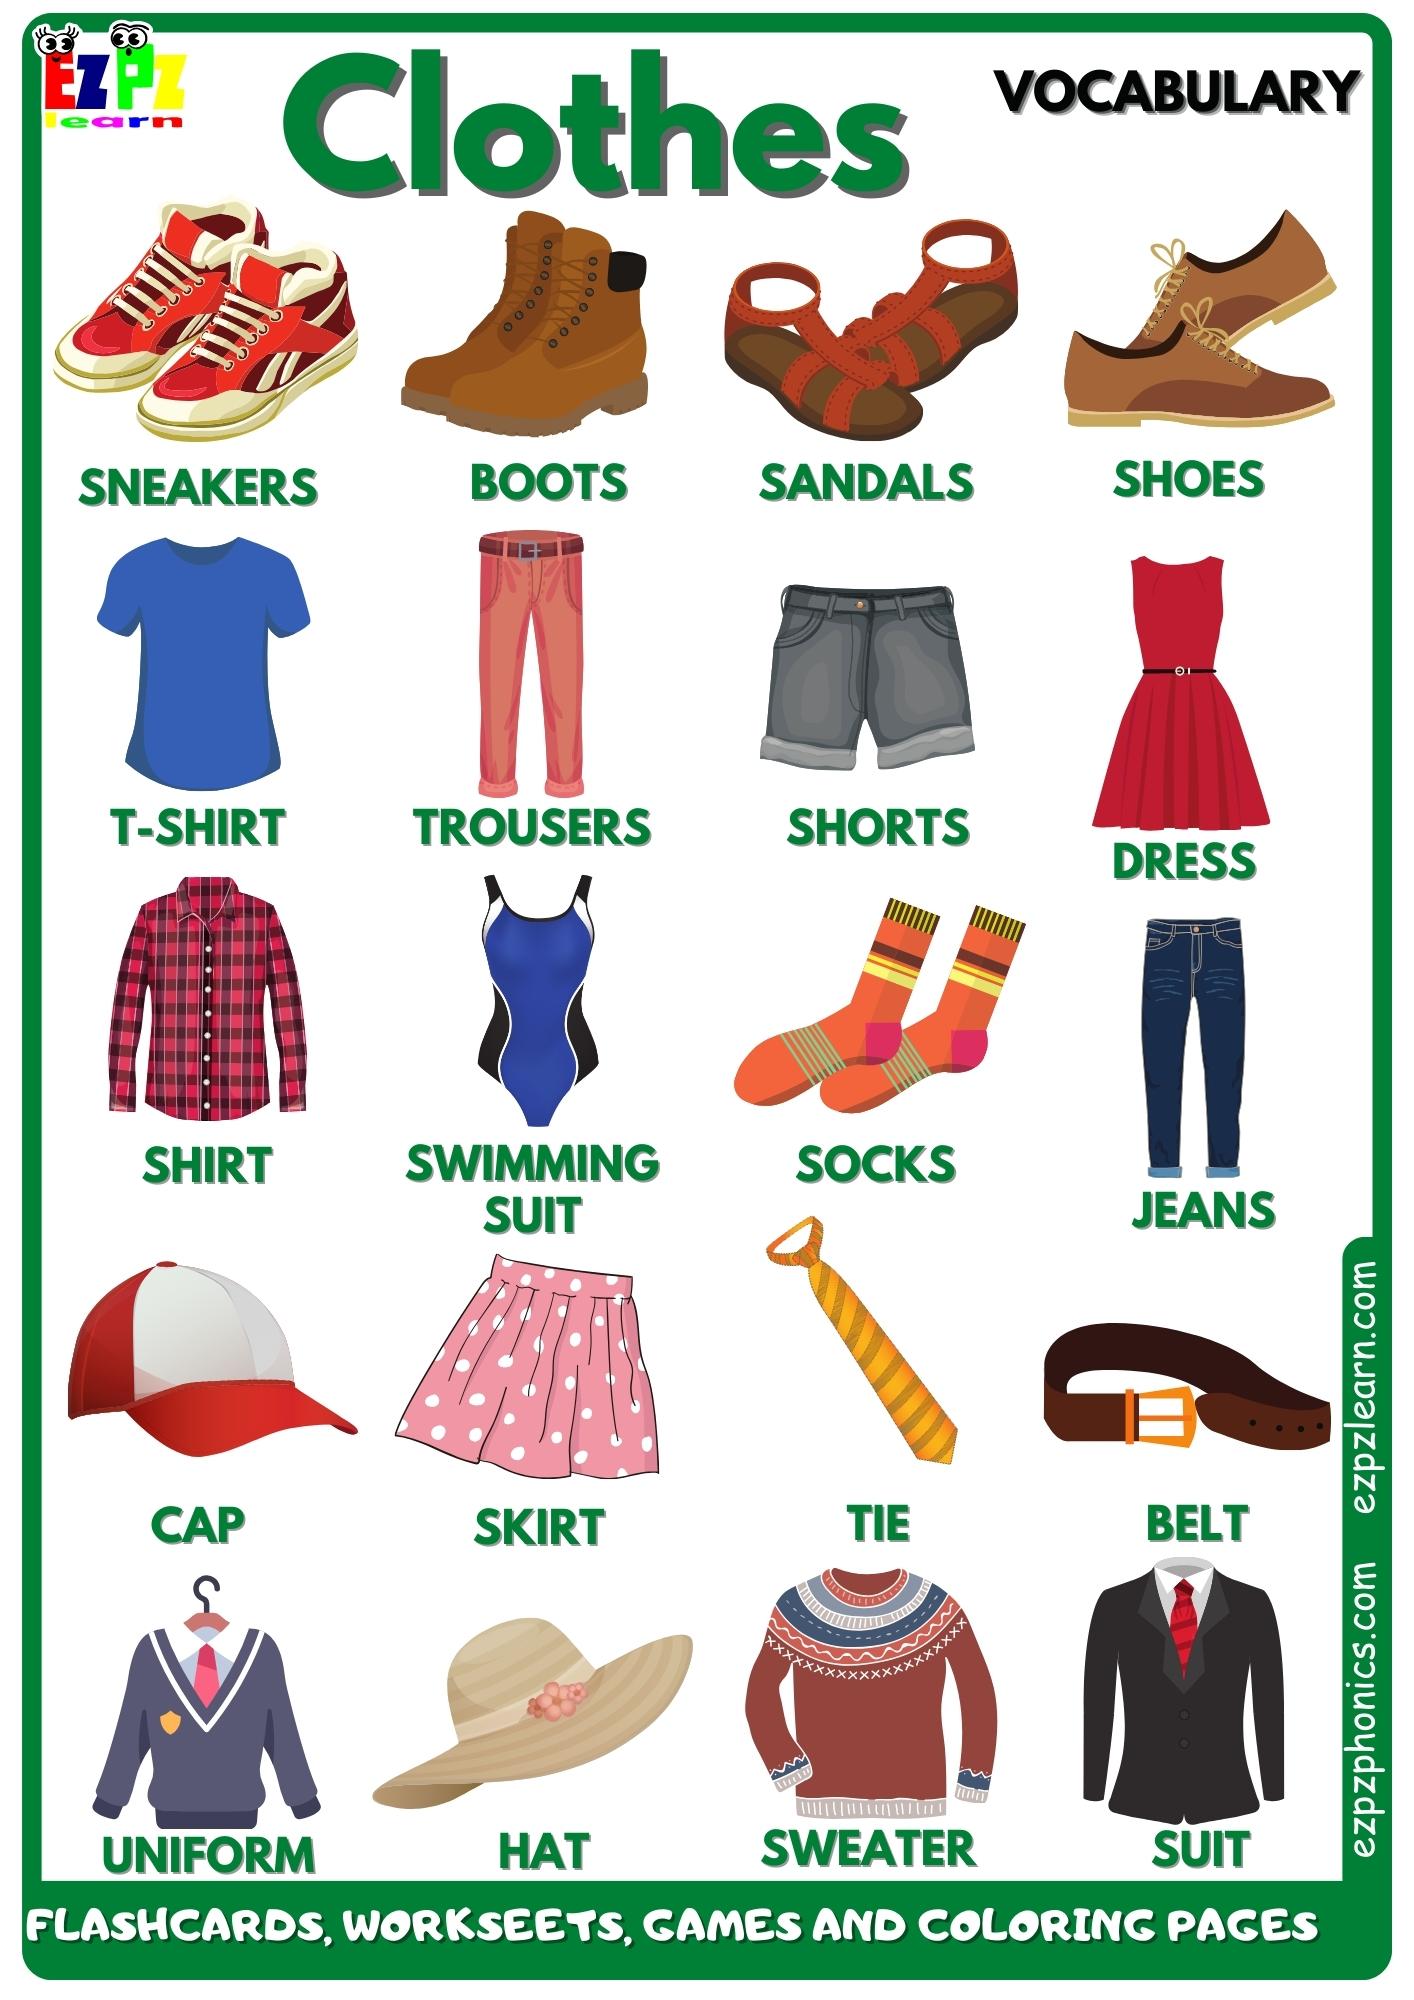 Winter Clothing Words and Pictures Dice - ESL Winter Clothes Vocabulary Game